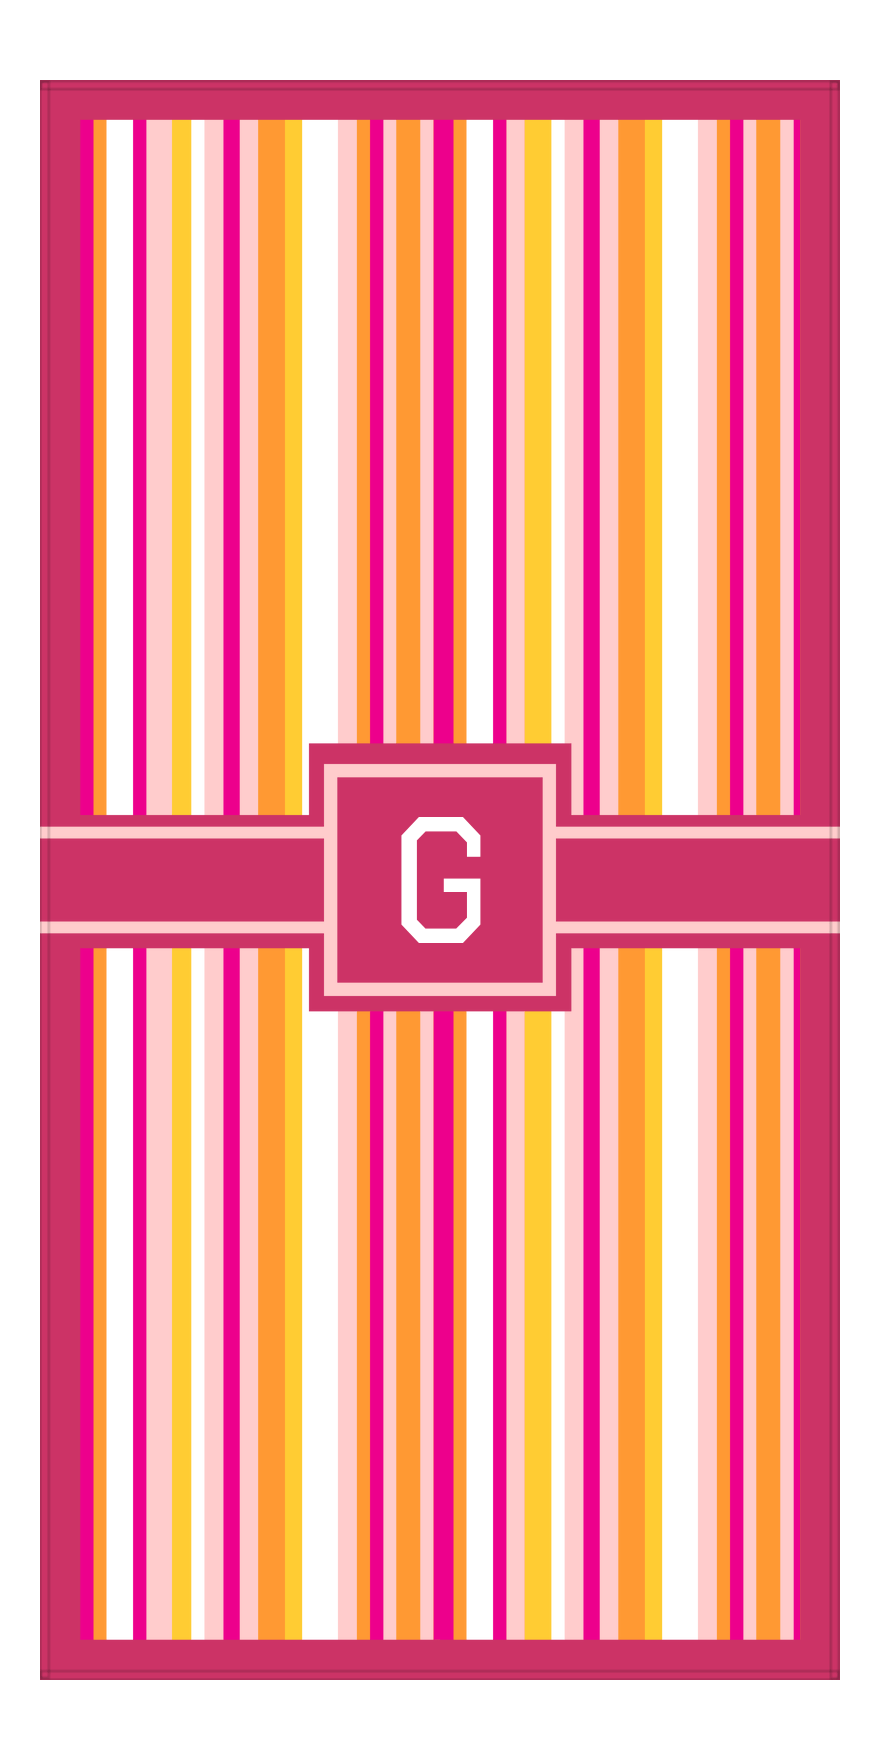 Personalized 5 Color Stripes 2 Repeat Beach Towel - Vertical - Pink and Orange - Square with Ribbon Frame - Front View